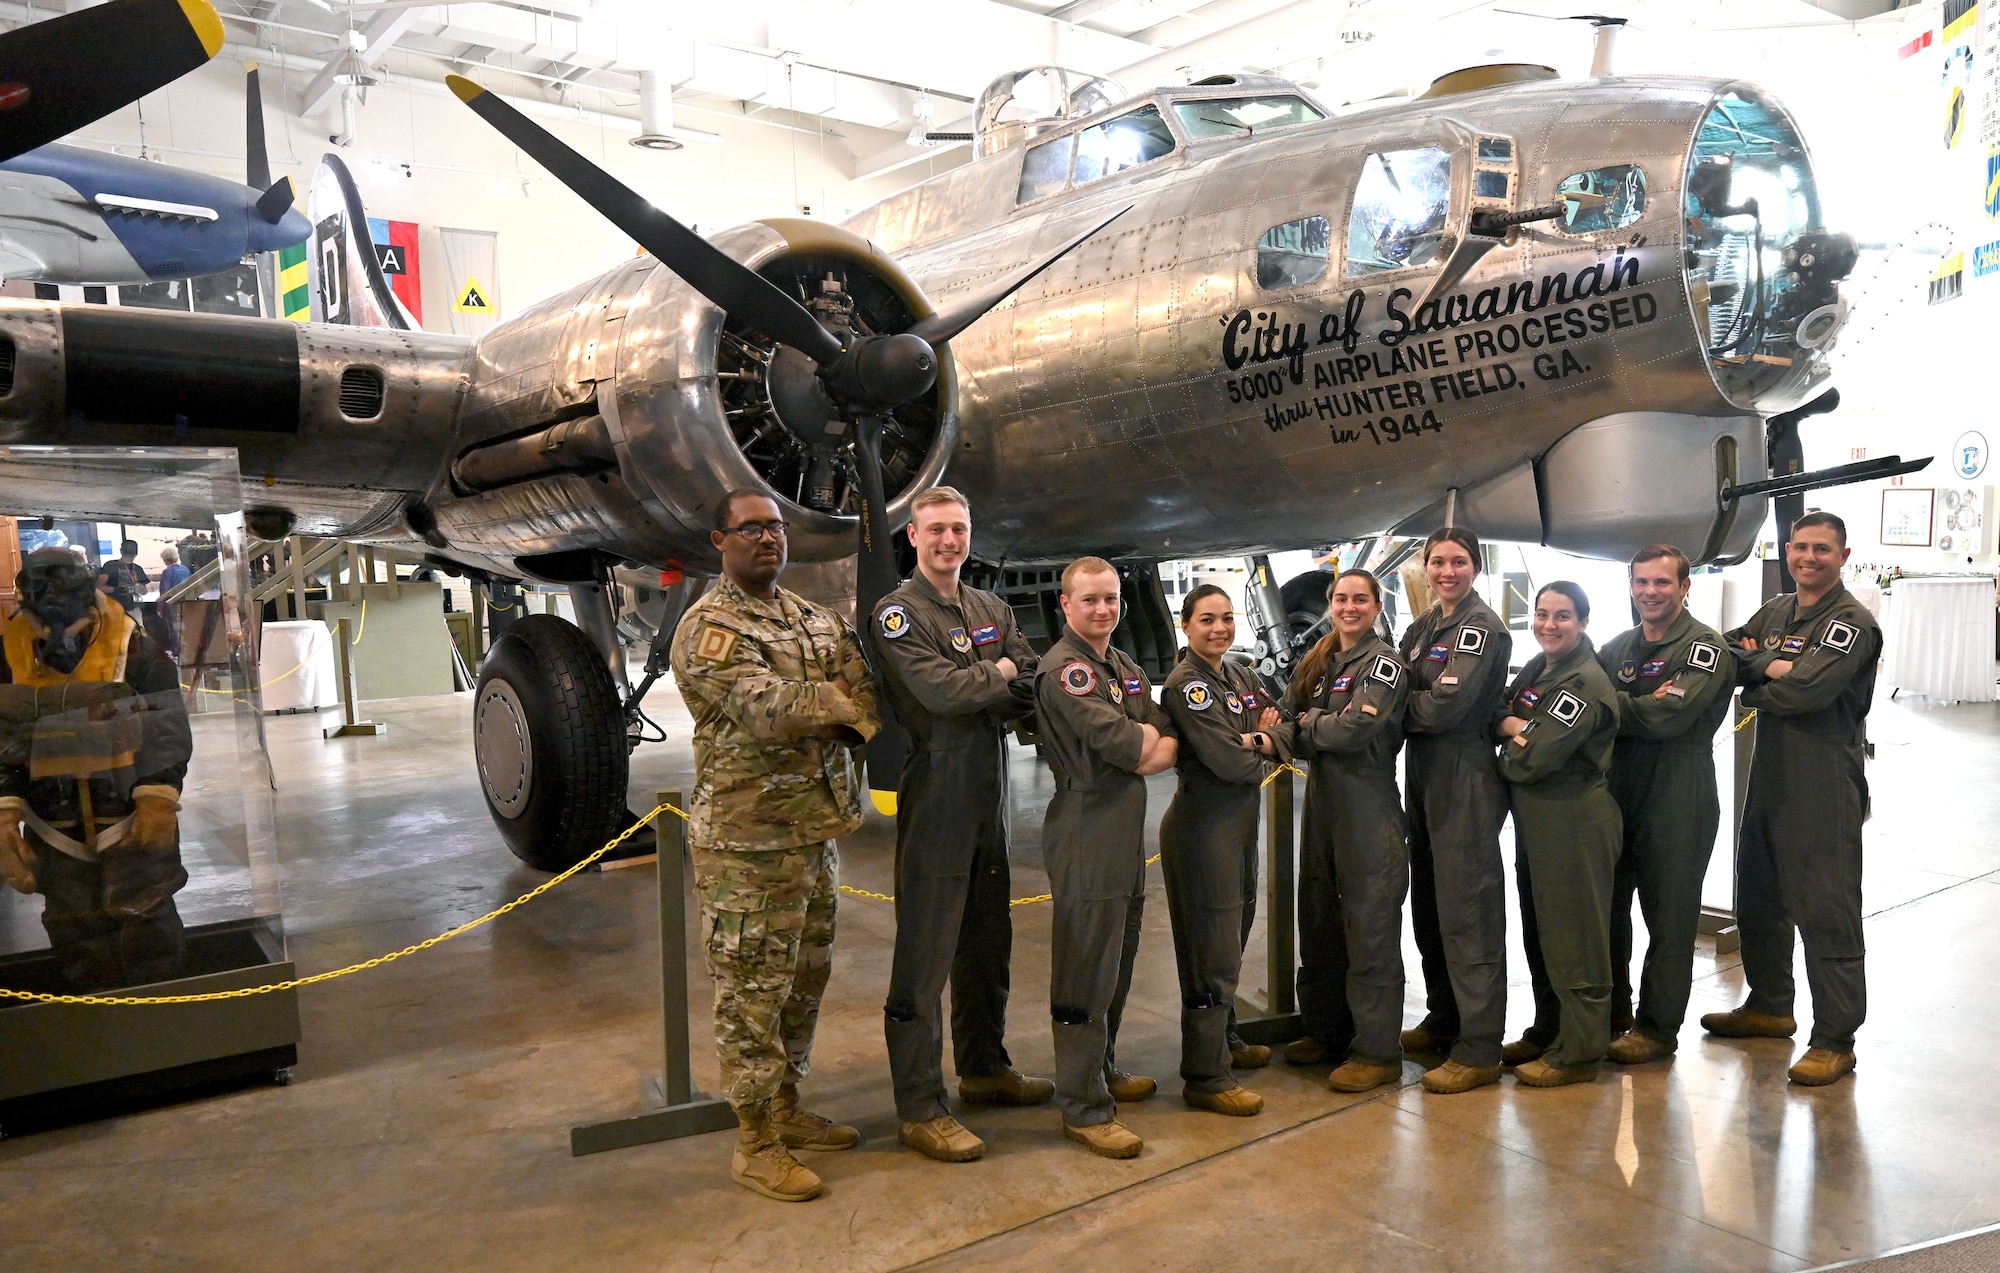 Airmen from the 100th Air Refueling Wing at Royal Air Force Mildenhall, show today’s Air Force with a B-17 Flying Fortress, “The City of Savannah,” originally flown by U.S. Army Air Force Airmen during World War II, at the 100th Bomb Group reunion, National Museum of the Mighty Eighth Air Force, Savanna, Georgia, May 25, 2023. They attended the reunion and met veterans and their families, to learn more about the heritage of their wing.(U.S. Air Force photo by Karen Abeyasekere)